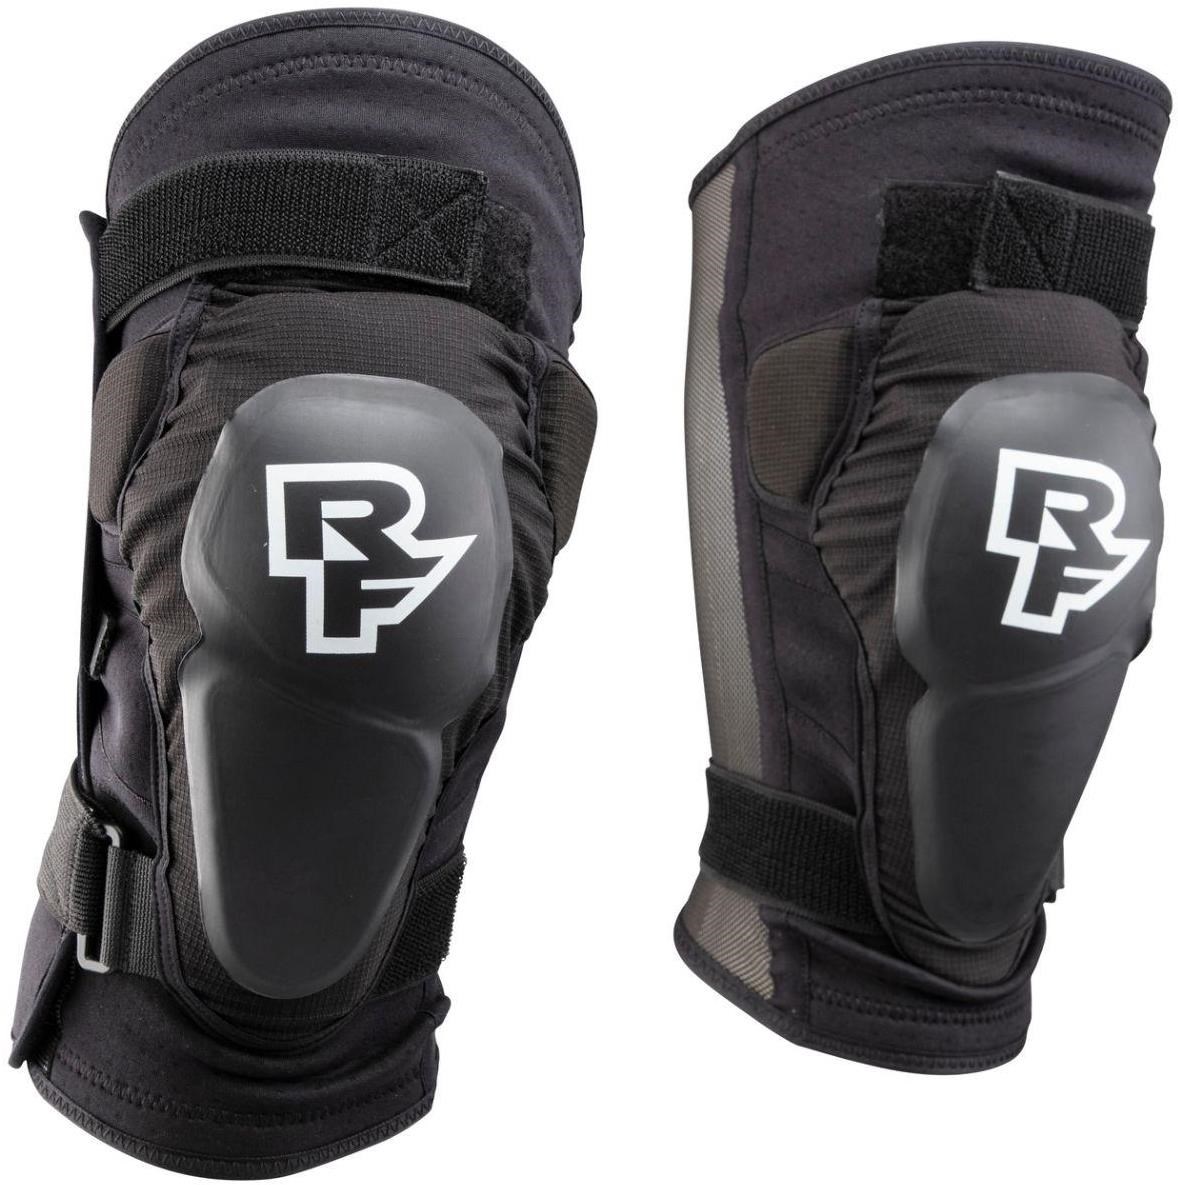 Race Face Roam Stealth Knee Guards product image